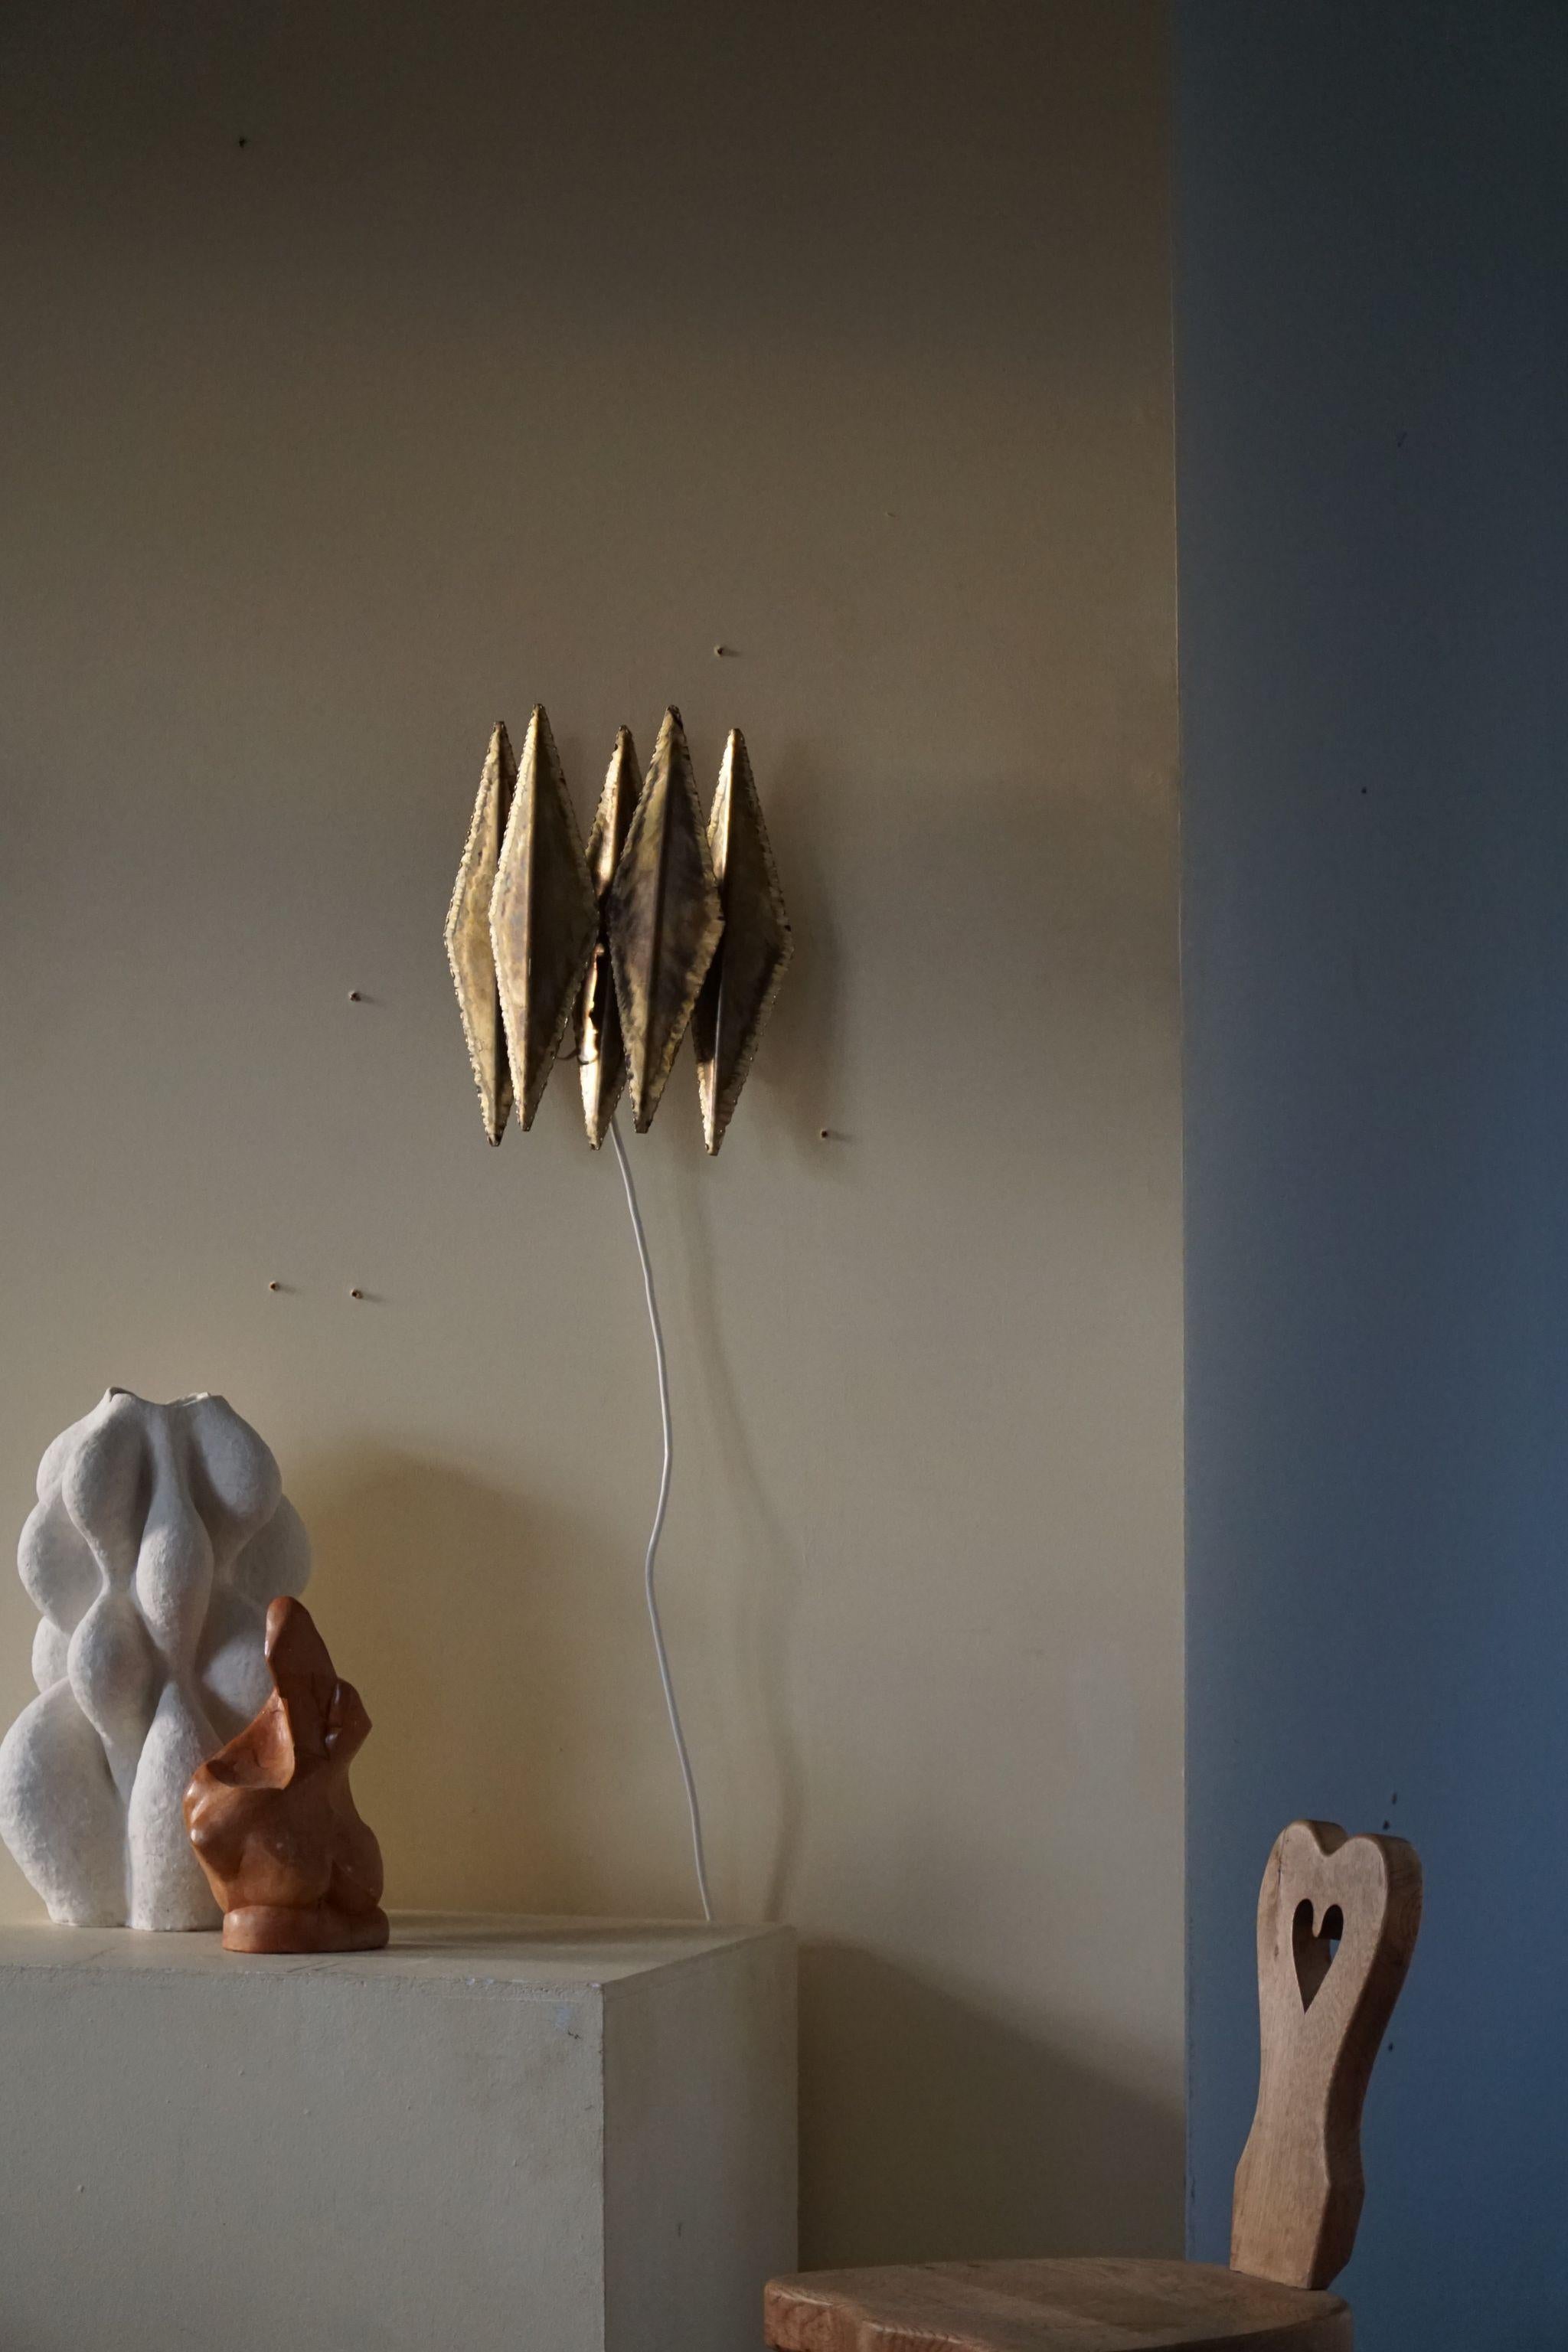 Danish modern brutalist wall unit light, made by Svend Aage Holm Sørensen in 1960s.
The brass petals are torch cut and acid treated for effect - Holm Sorensen's signature method. The piece comes with original brass chain. 

Overall good vintage